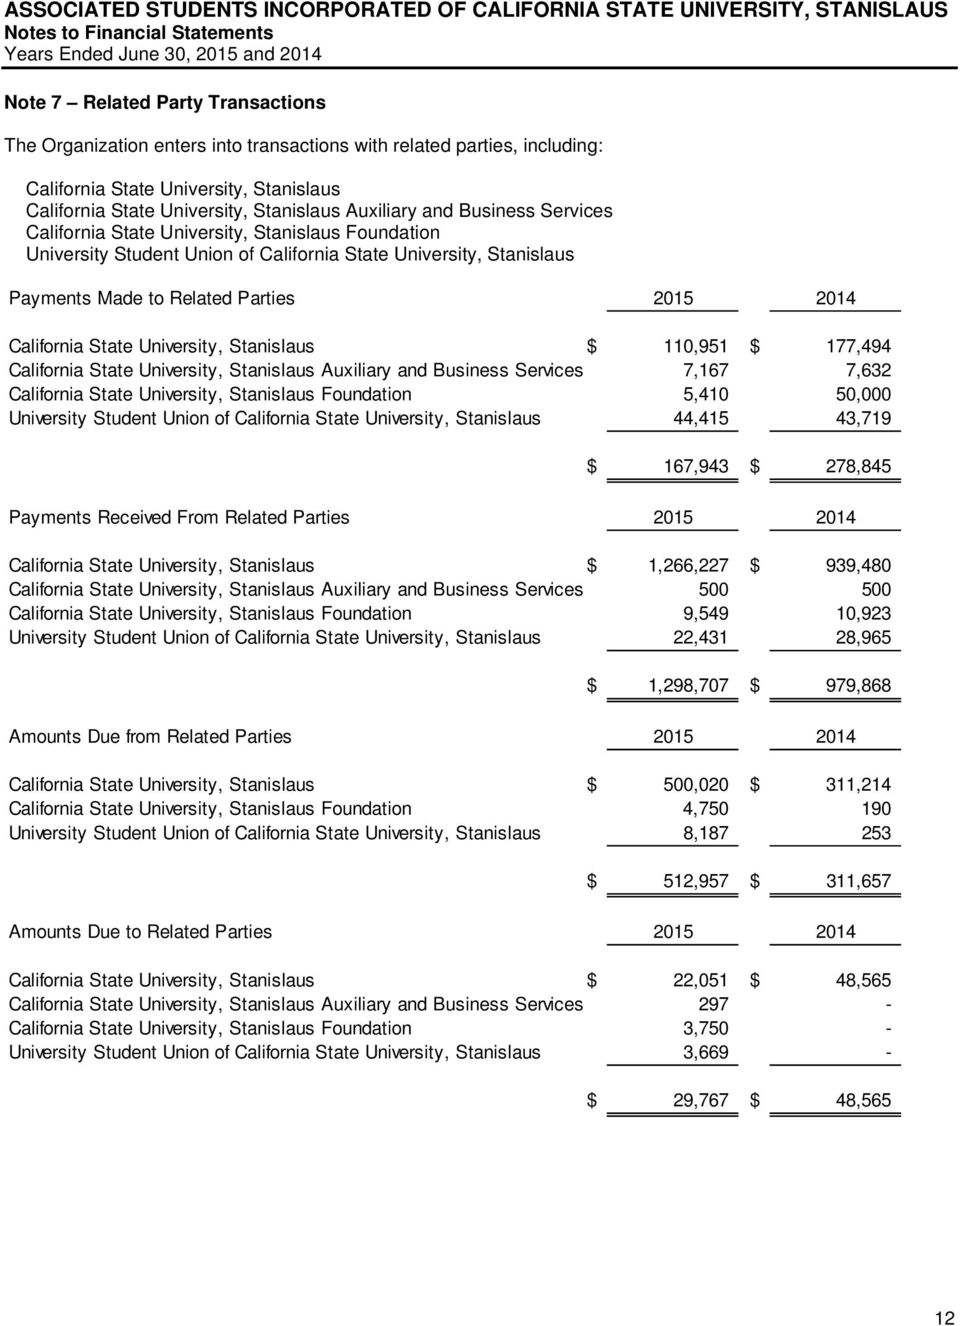 University, Stanislaus Payments Made to Related Parties 2015 2014 California State University, Stanislaus $ 110,951 $ 177,494 California State University, Stanislaus Auxiliary and Business Services